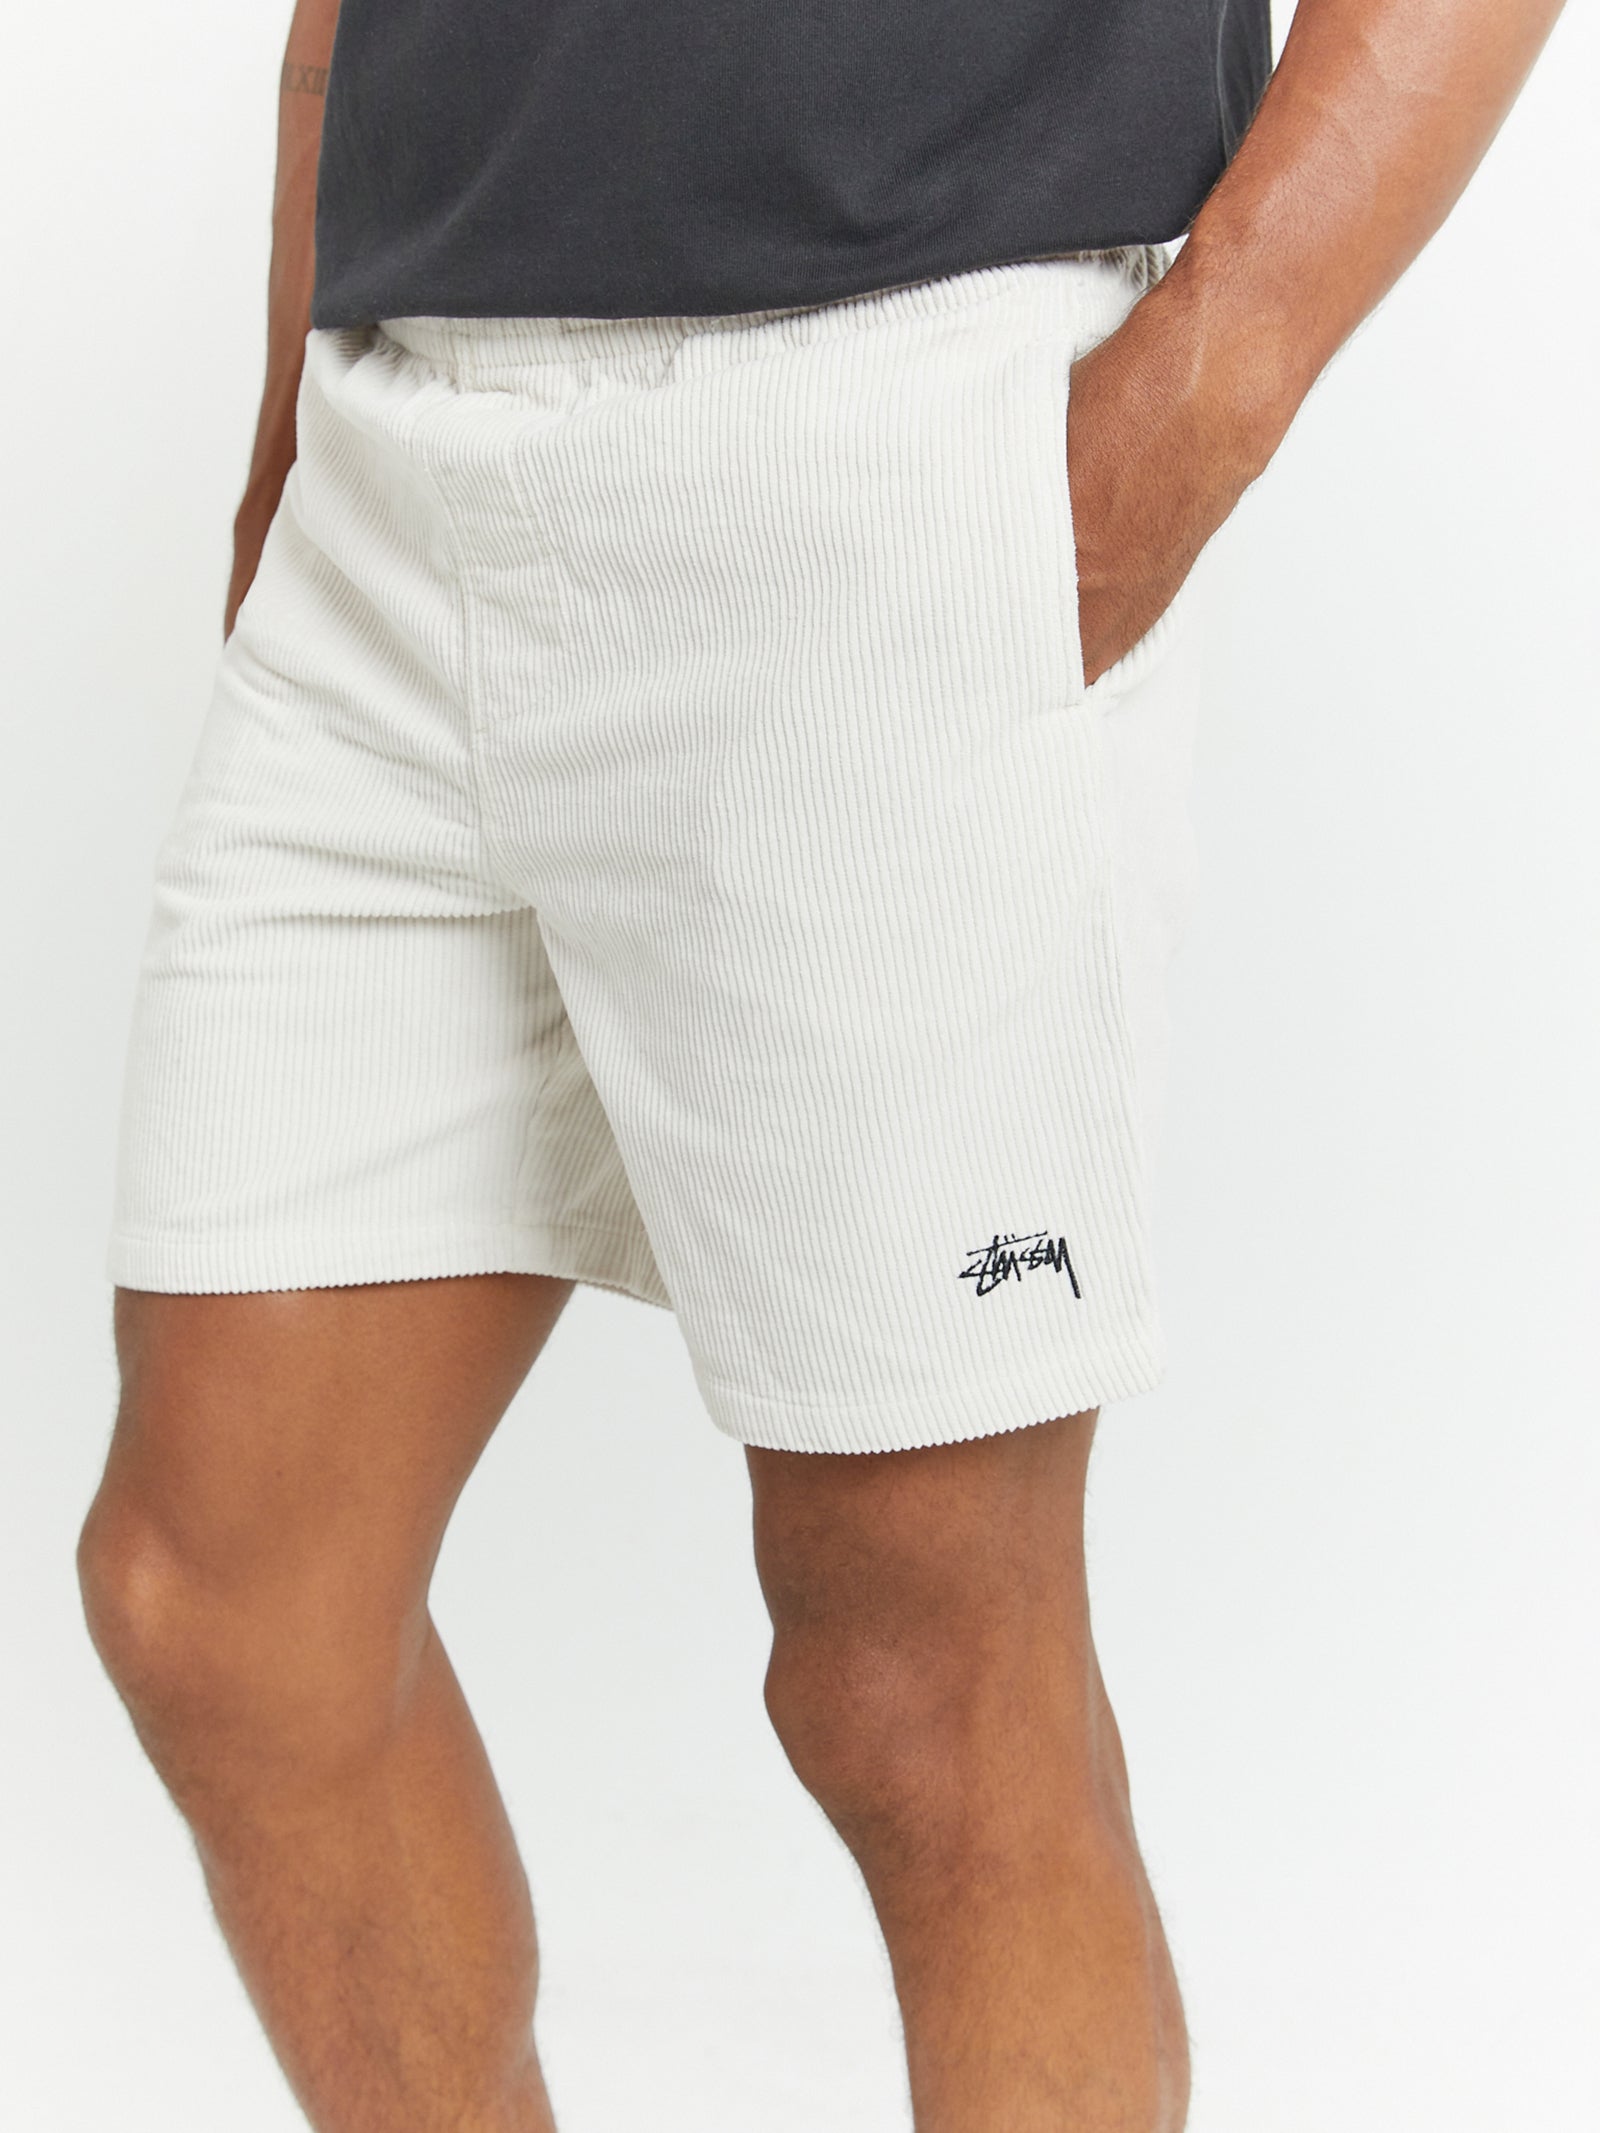 Wide Wale Cord Beachshorts in Pigment Blush